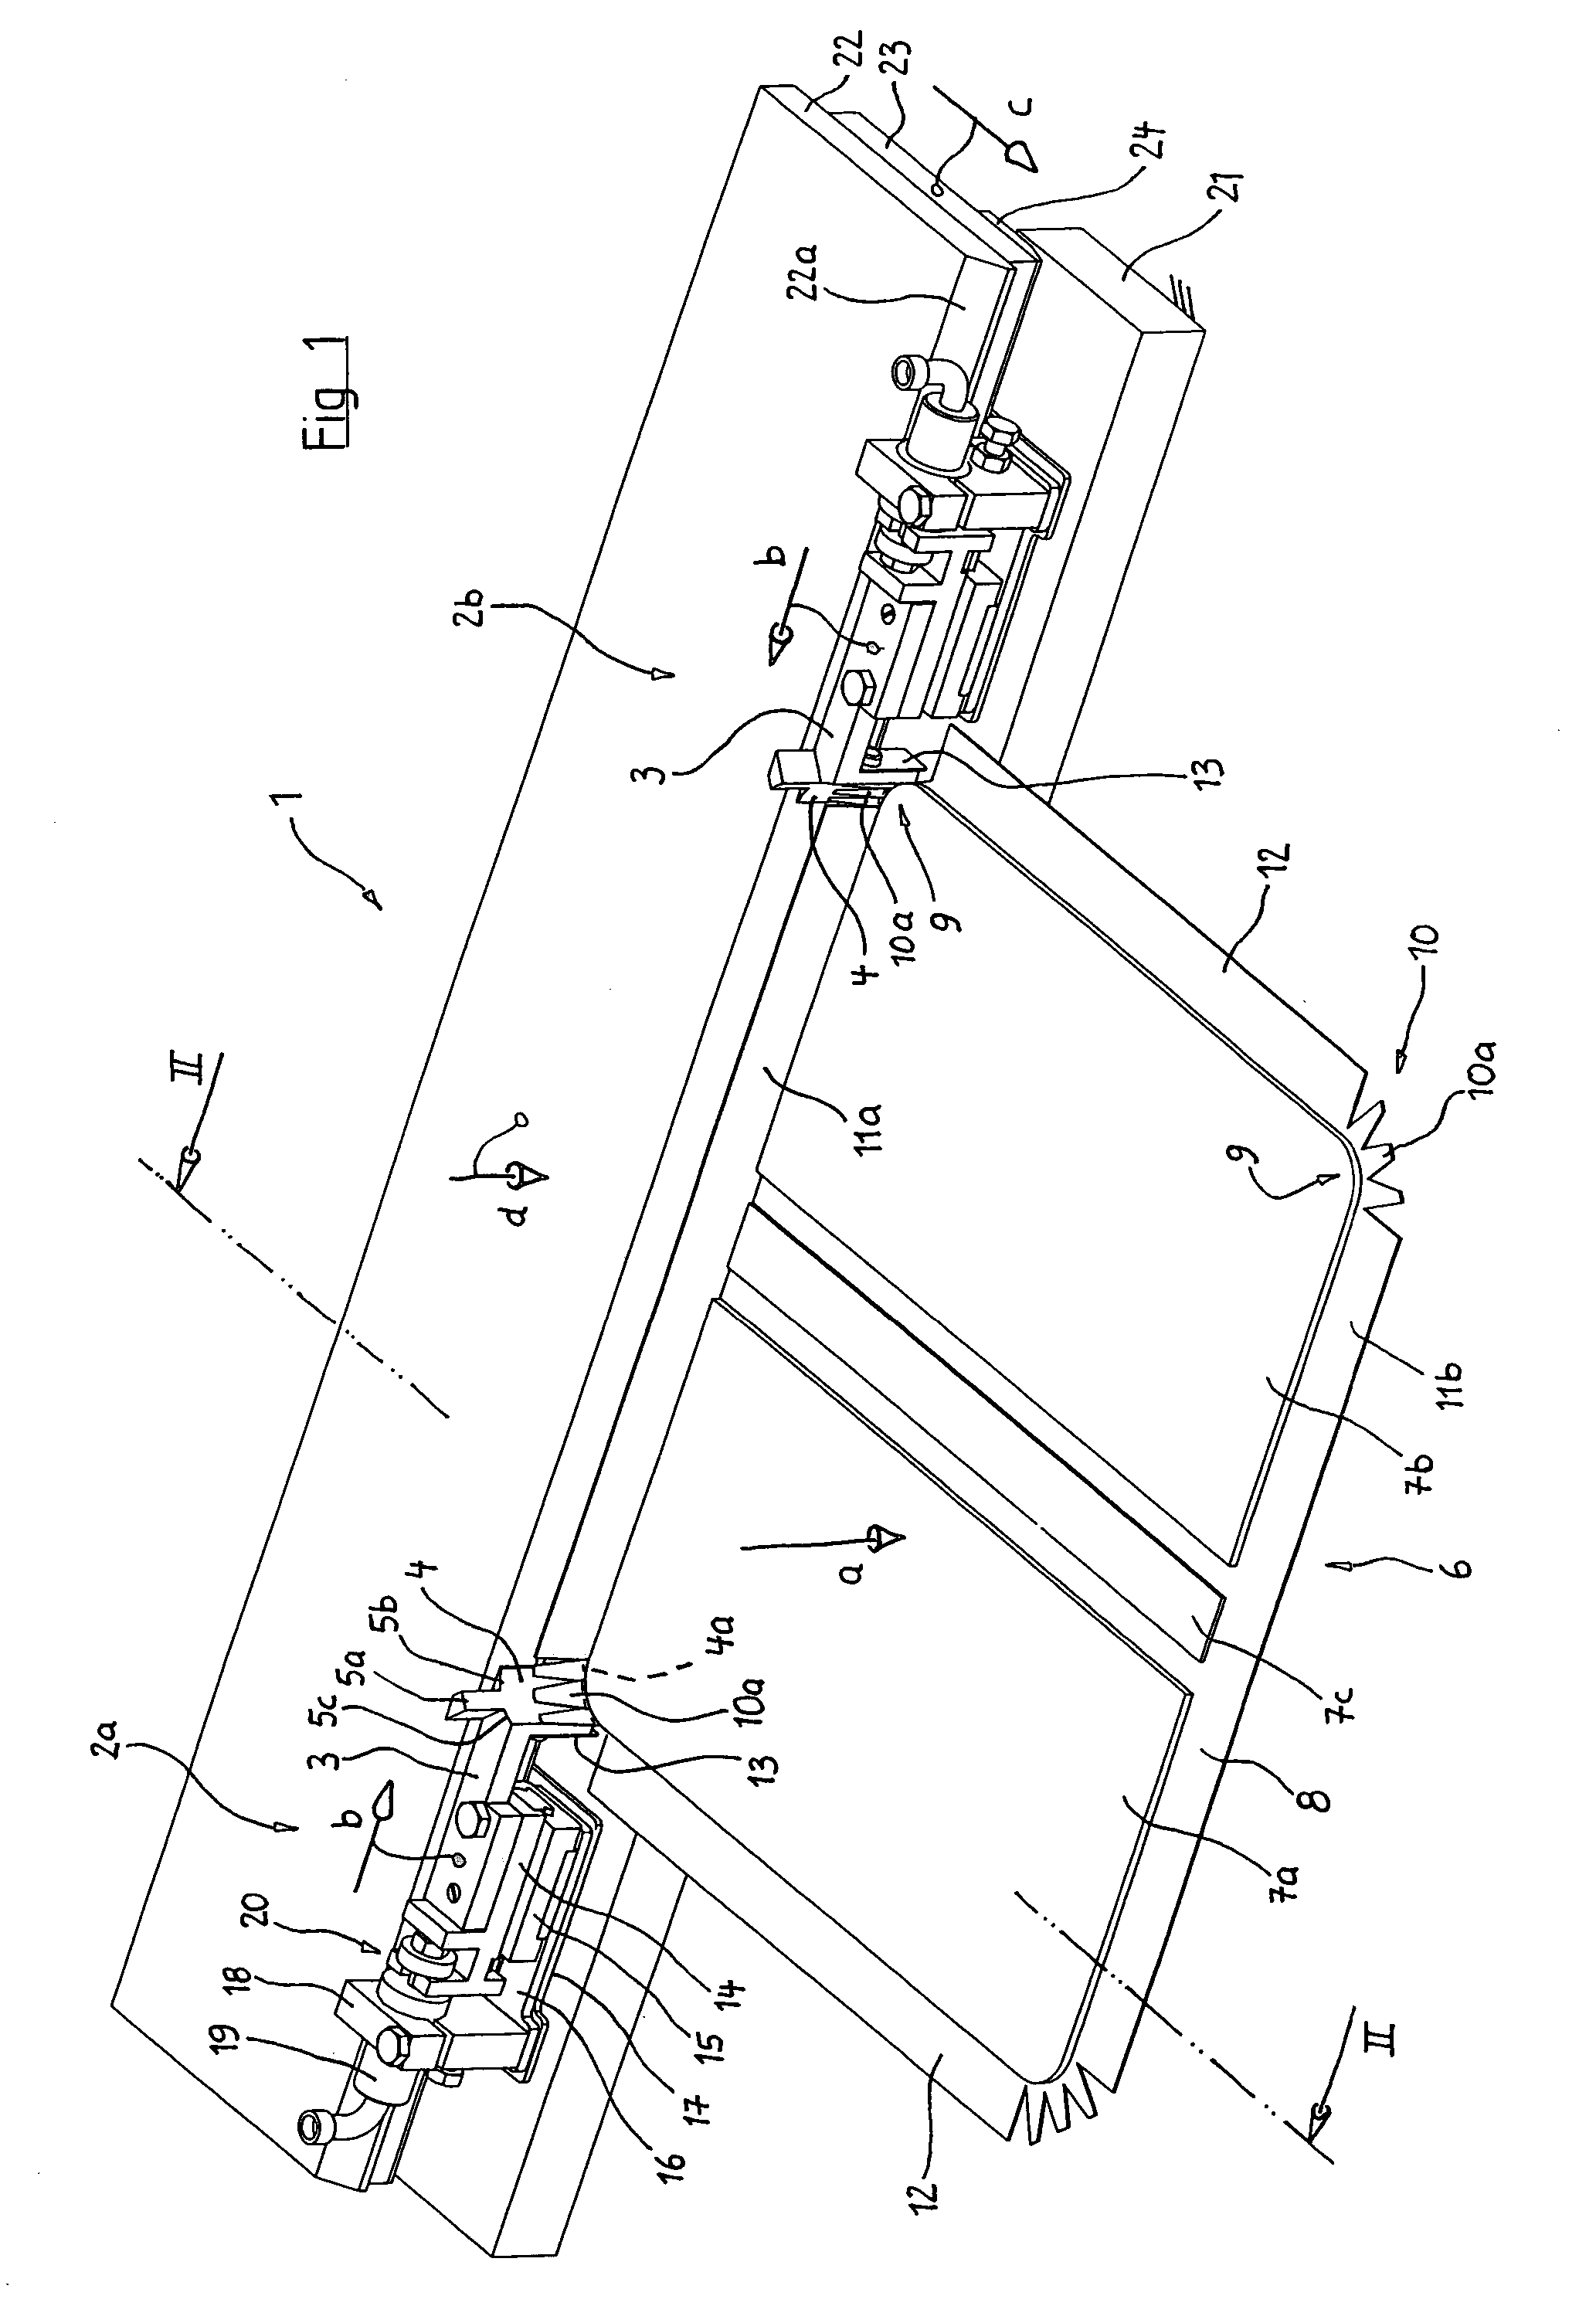 Method and device for producing cases with rounded corners